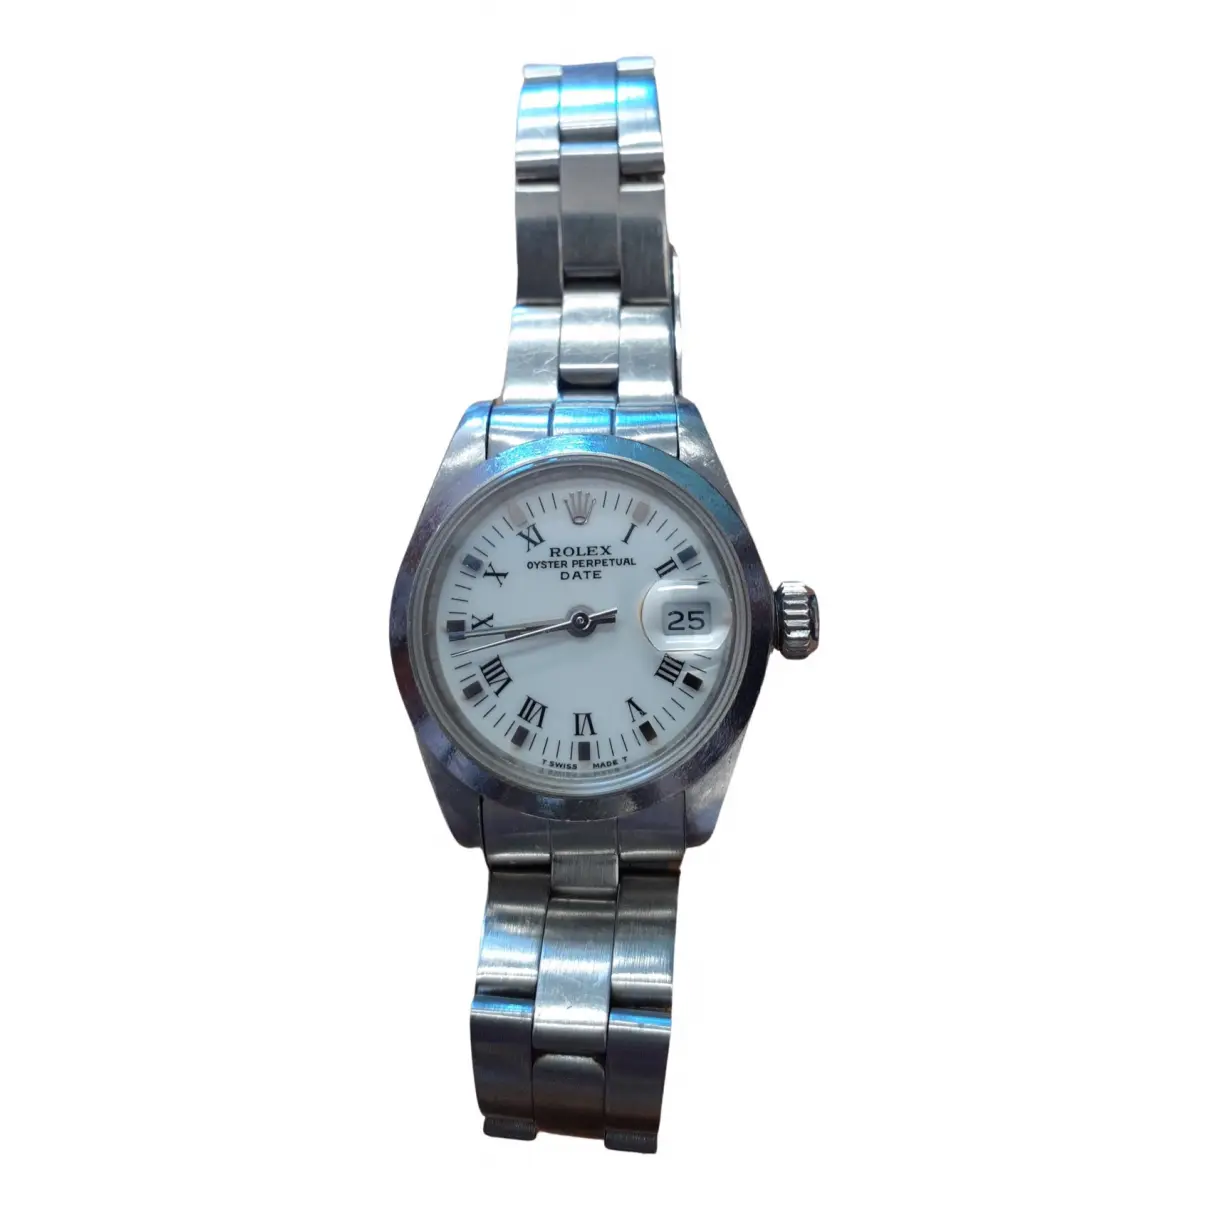 Lady Oyster Perpetual watch